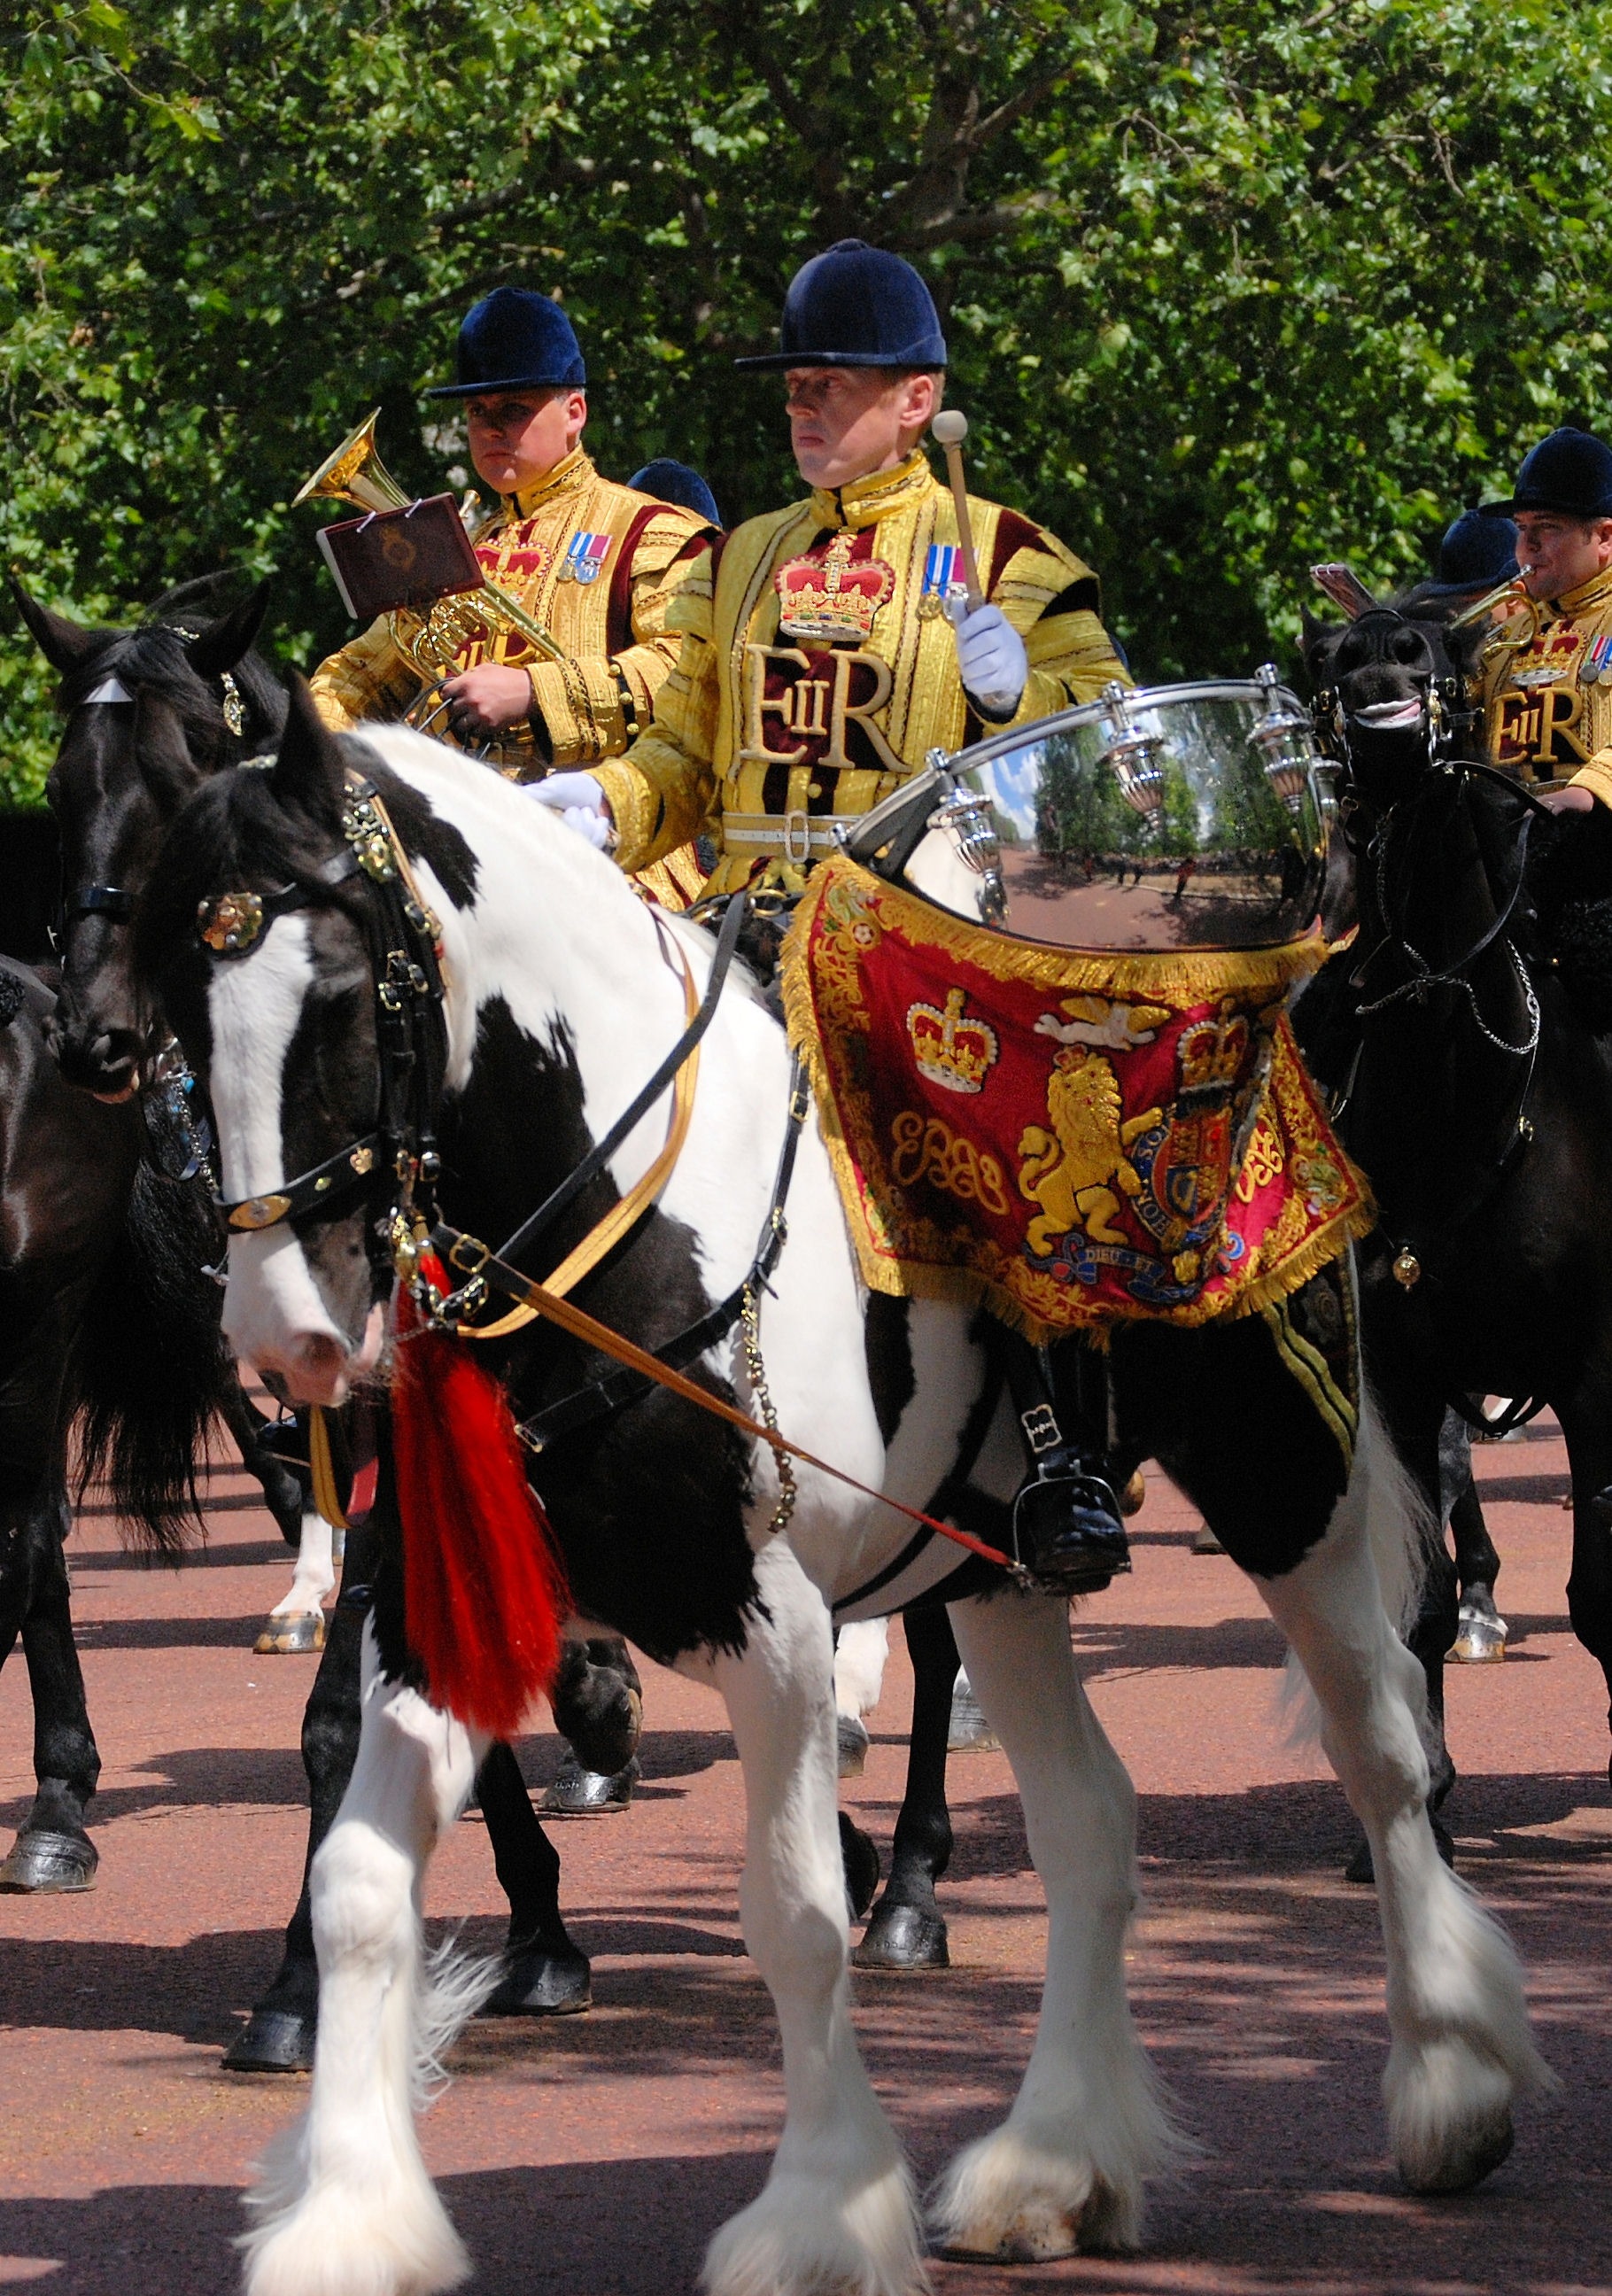 2 royal guards riding on horse